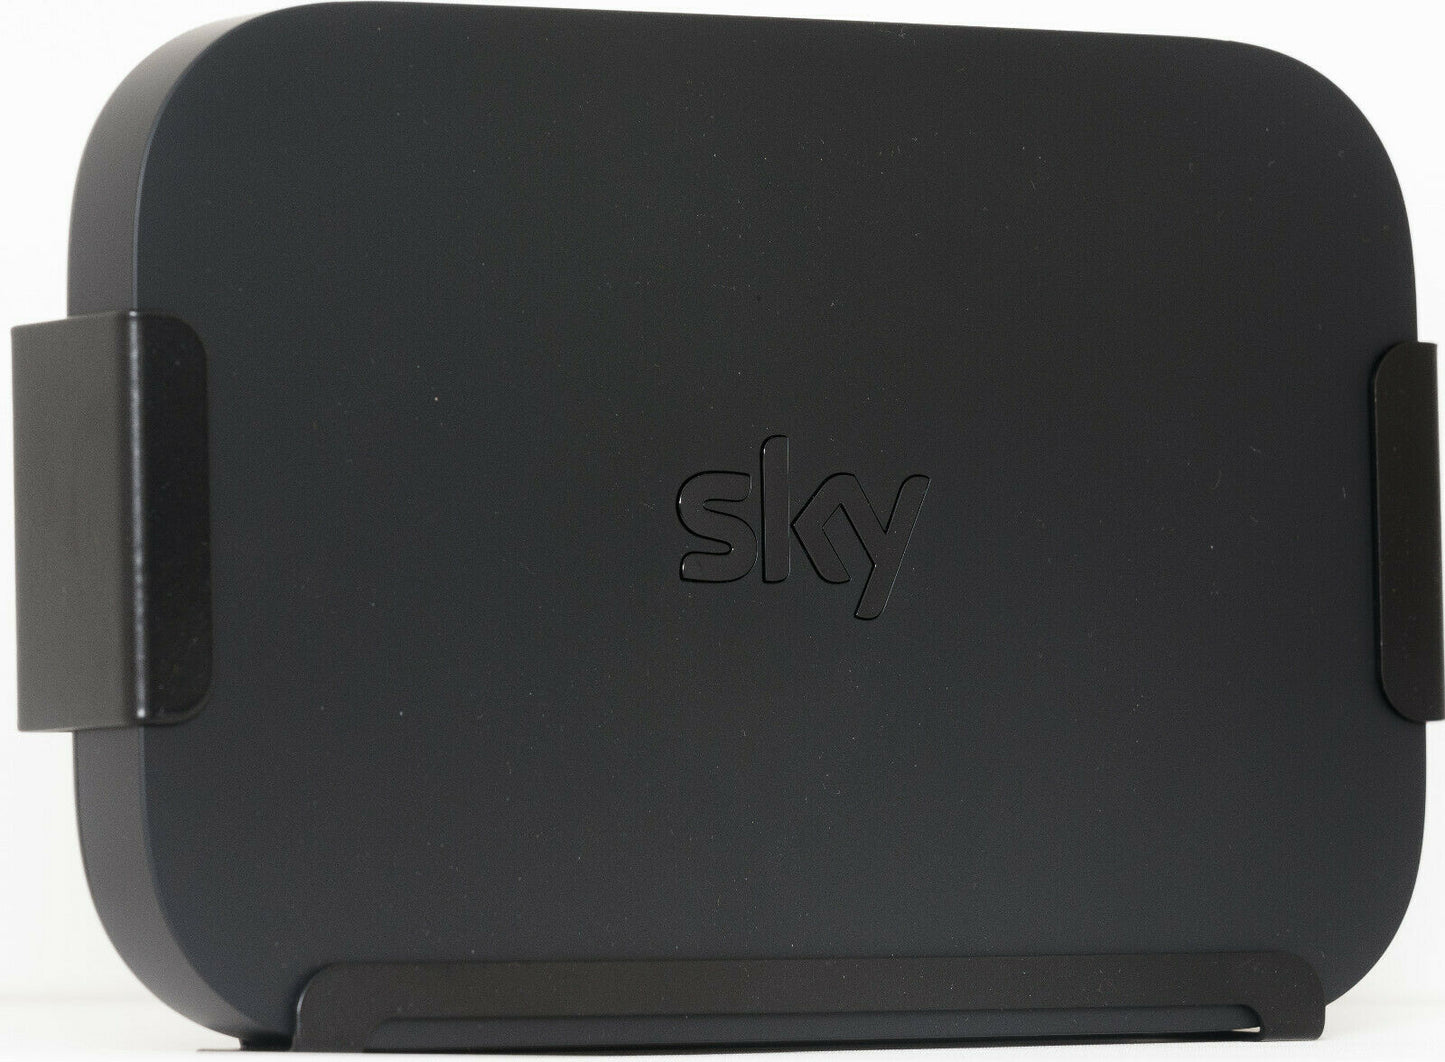 Inbrackets Wall Mount for Sky Q Mini Box | Multi Direction Bracket | Easy Screwless Quick Install | Bracket Mount Sky Box Behind TV | Black Steel Sky Box Wall Mount | Easy Access to Cables | UK Made